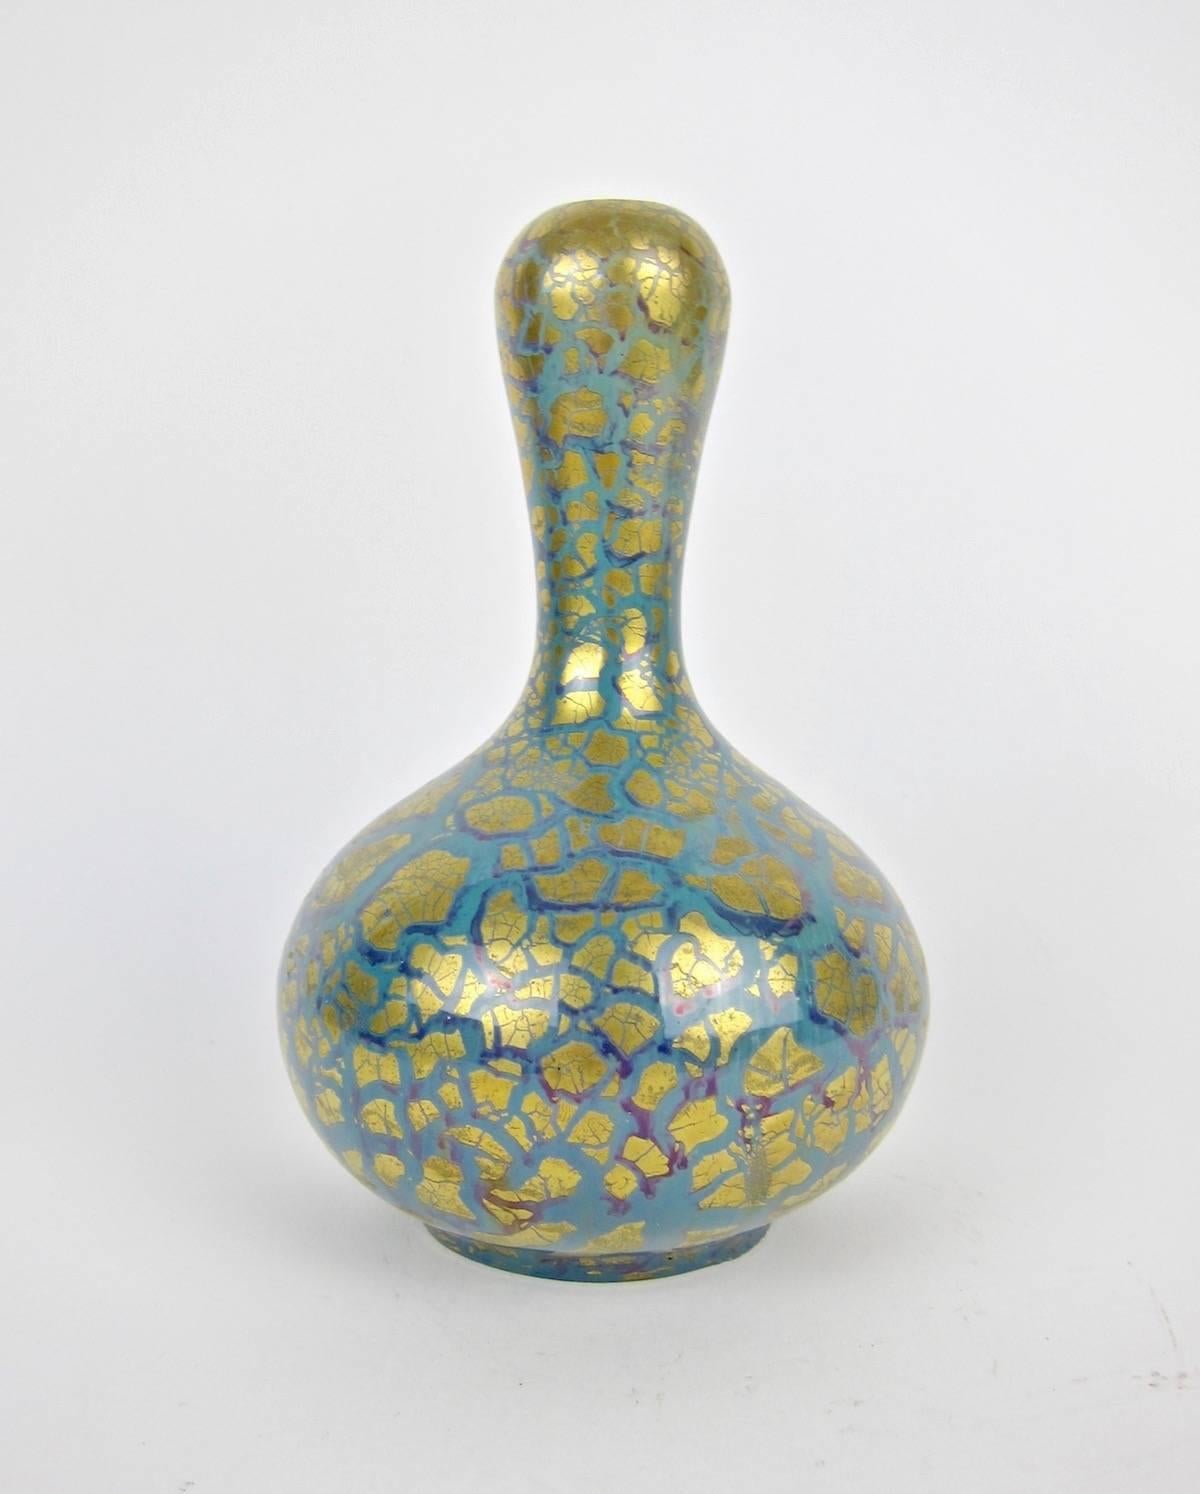 An early 20th century French art pottery vase with a golden metallic glaze, made by Joseph and Pierre Mougin Frères in Nancy, France between 1906 and 1916. Decorated with an organic Art Nouveau decor scheme of hand-painted tendrils of blue with